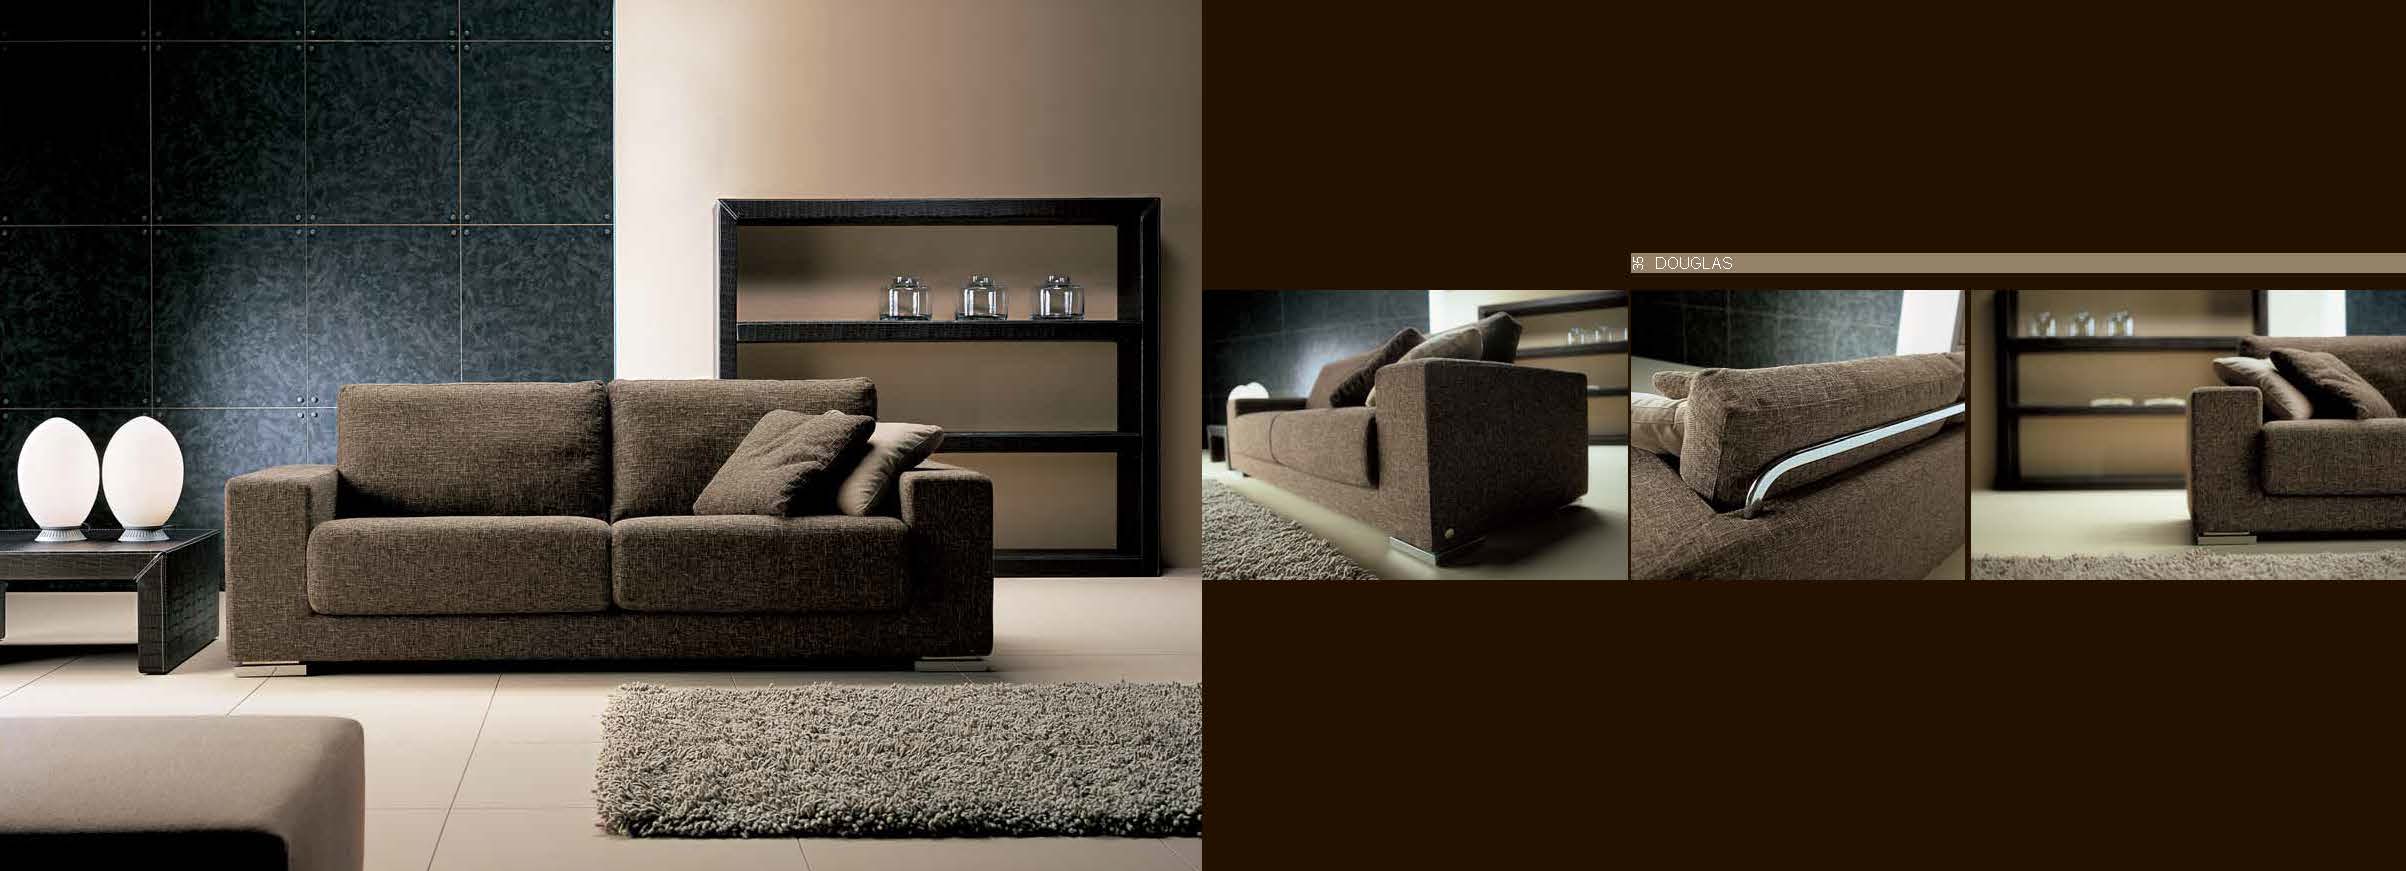 Living Room Furniture Sleepers Sofas Loveseats and Chairs Douglas